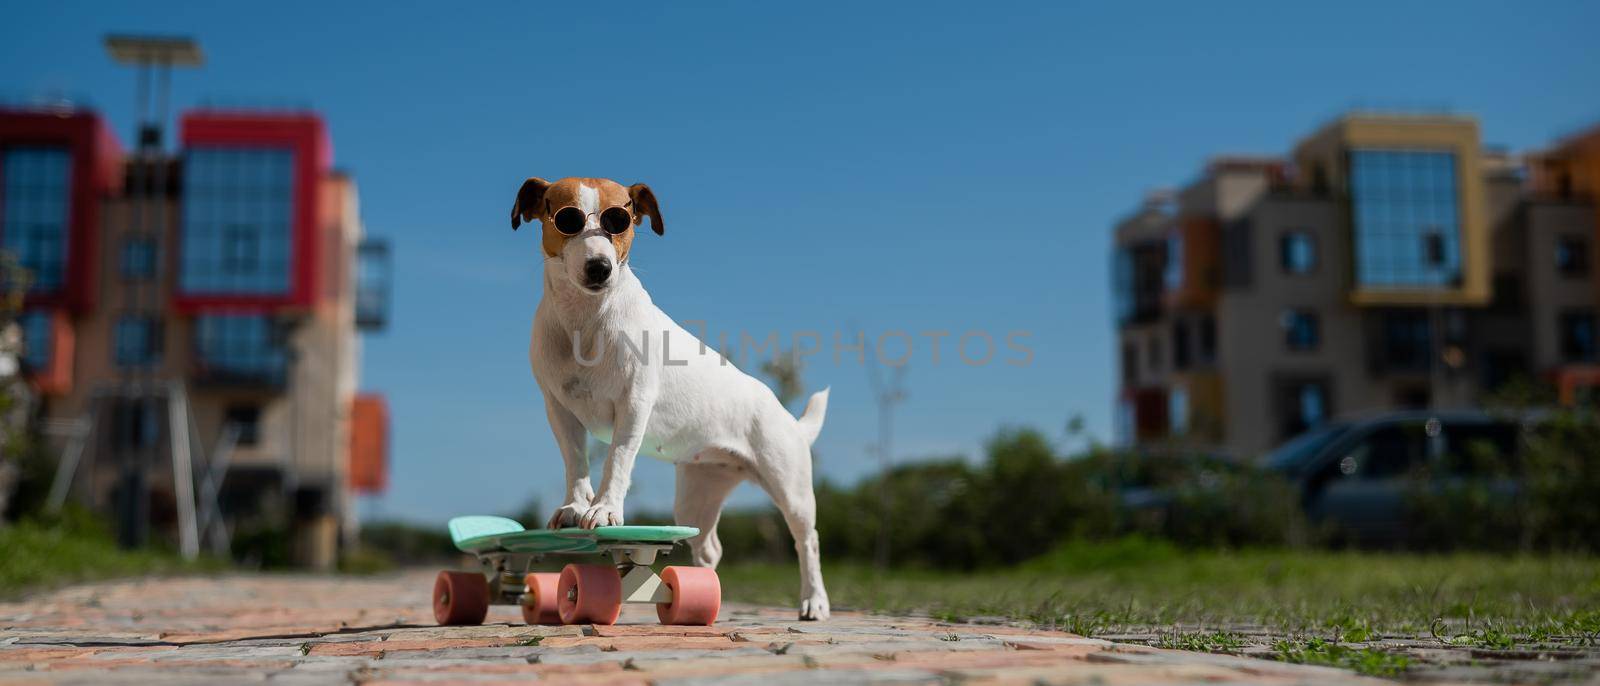 Jack russell terrier dog in sunglasses rides a penny board outdoors